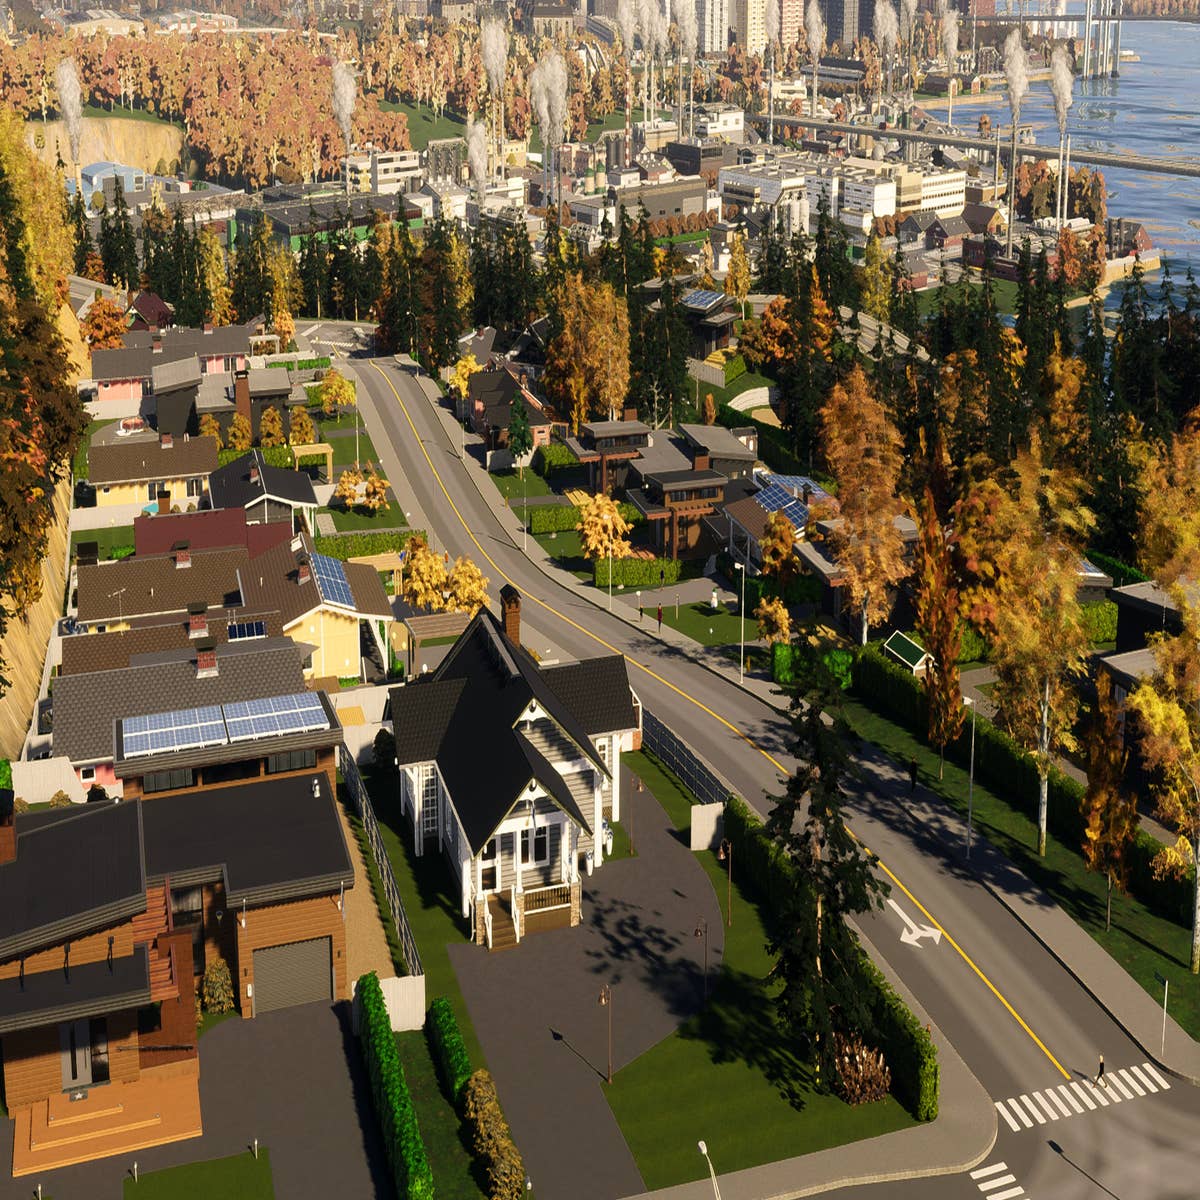 Official Release Trailer  OUT NOW I Cities: Skylines II 